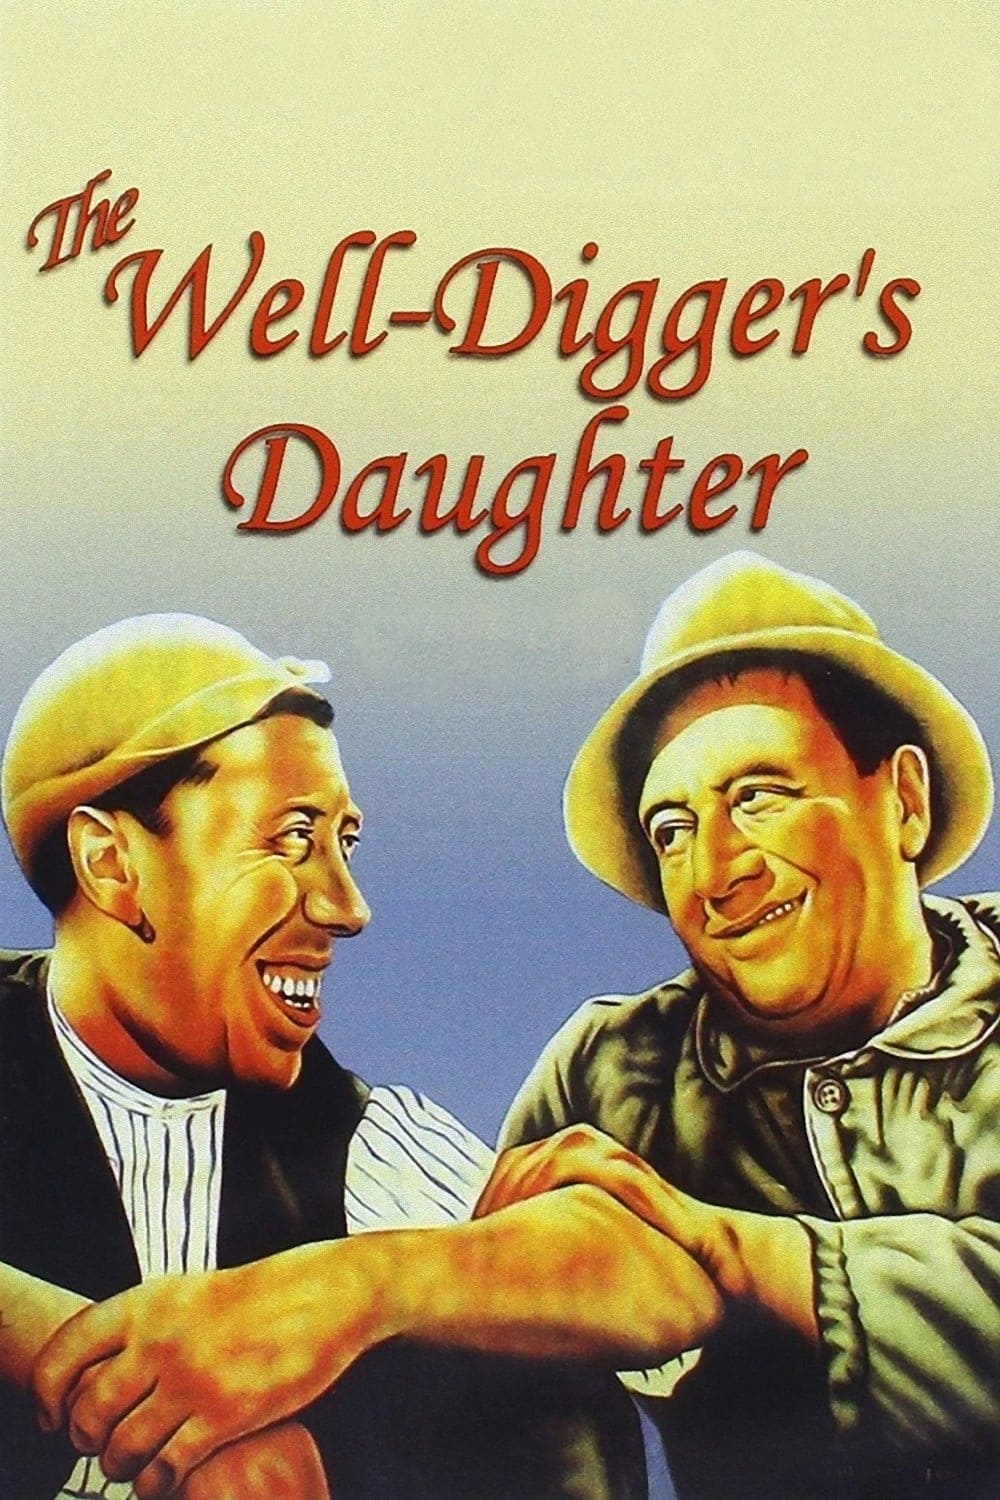 The Well-Digger's Daughter (1940)